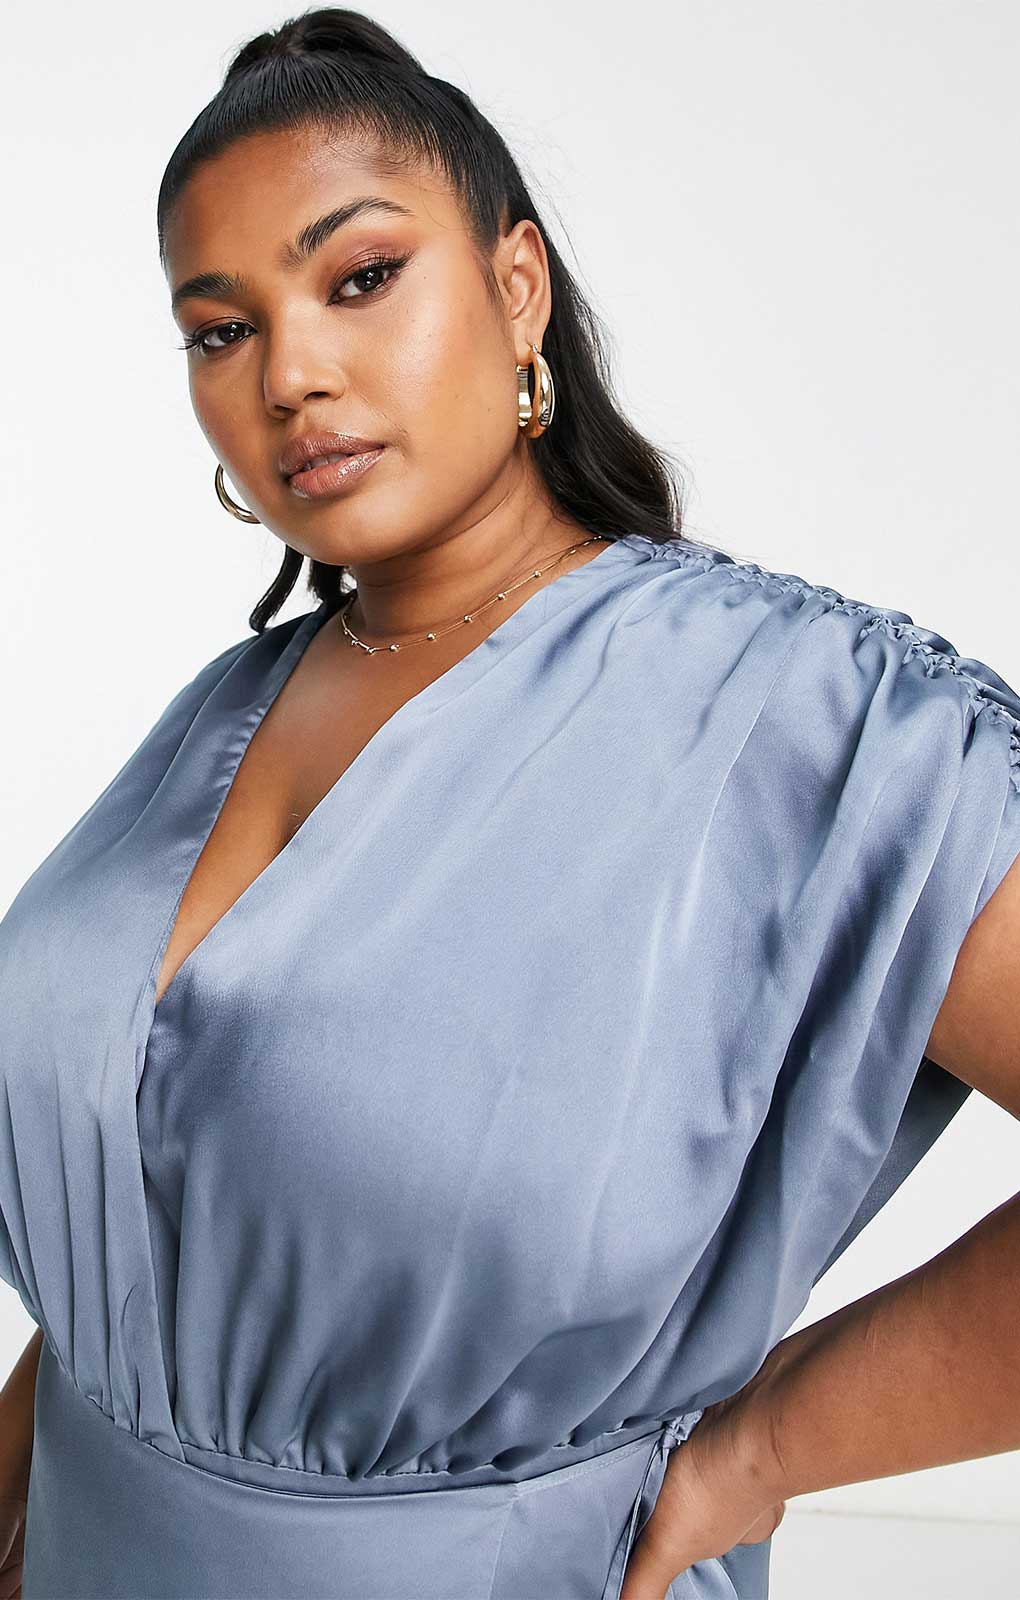 Asos Curve Satin Wrap Midi Dress With Ruched Detail In Dusky Blue product image